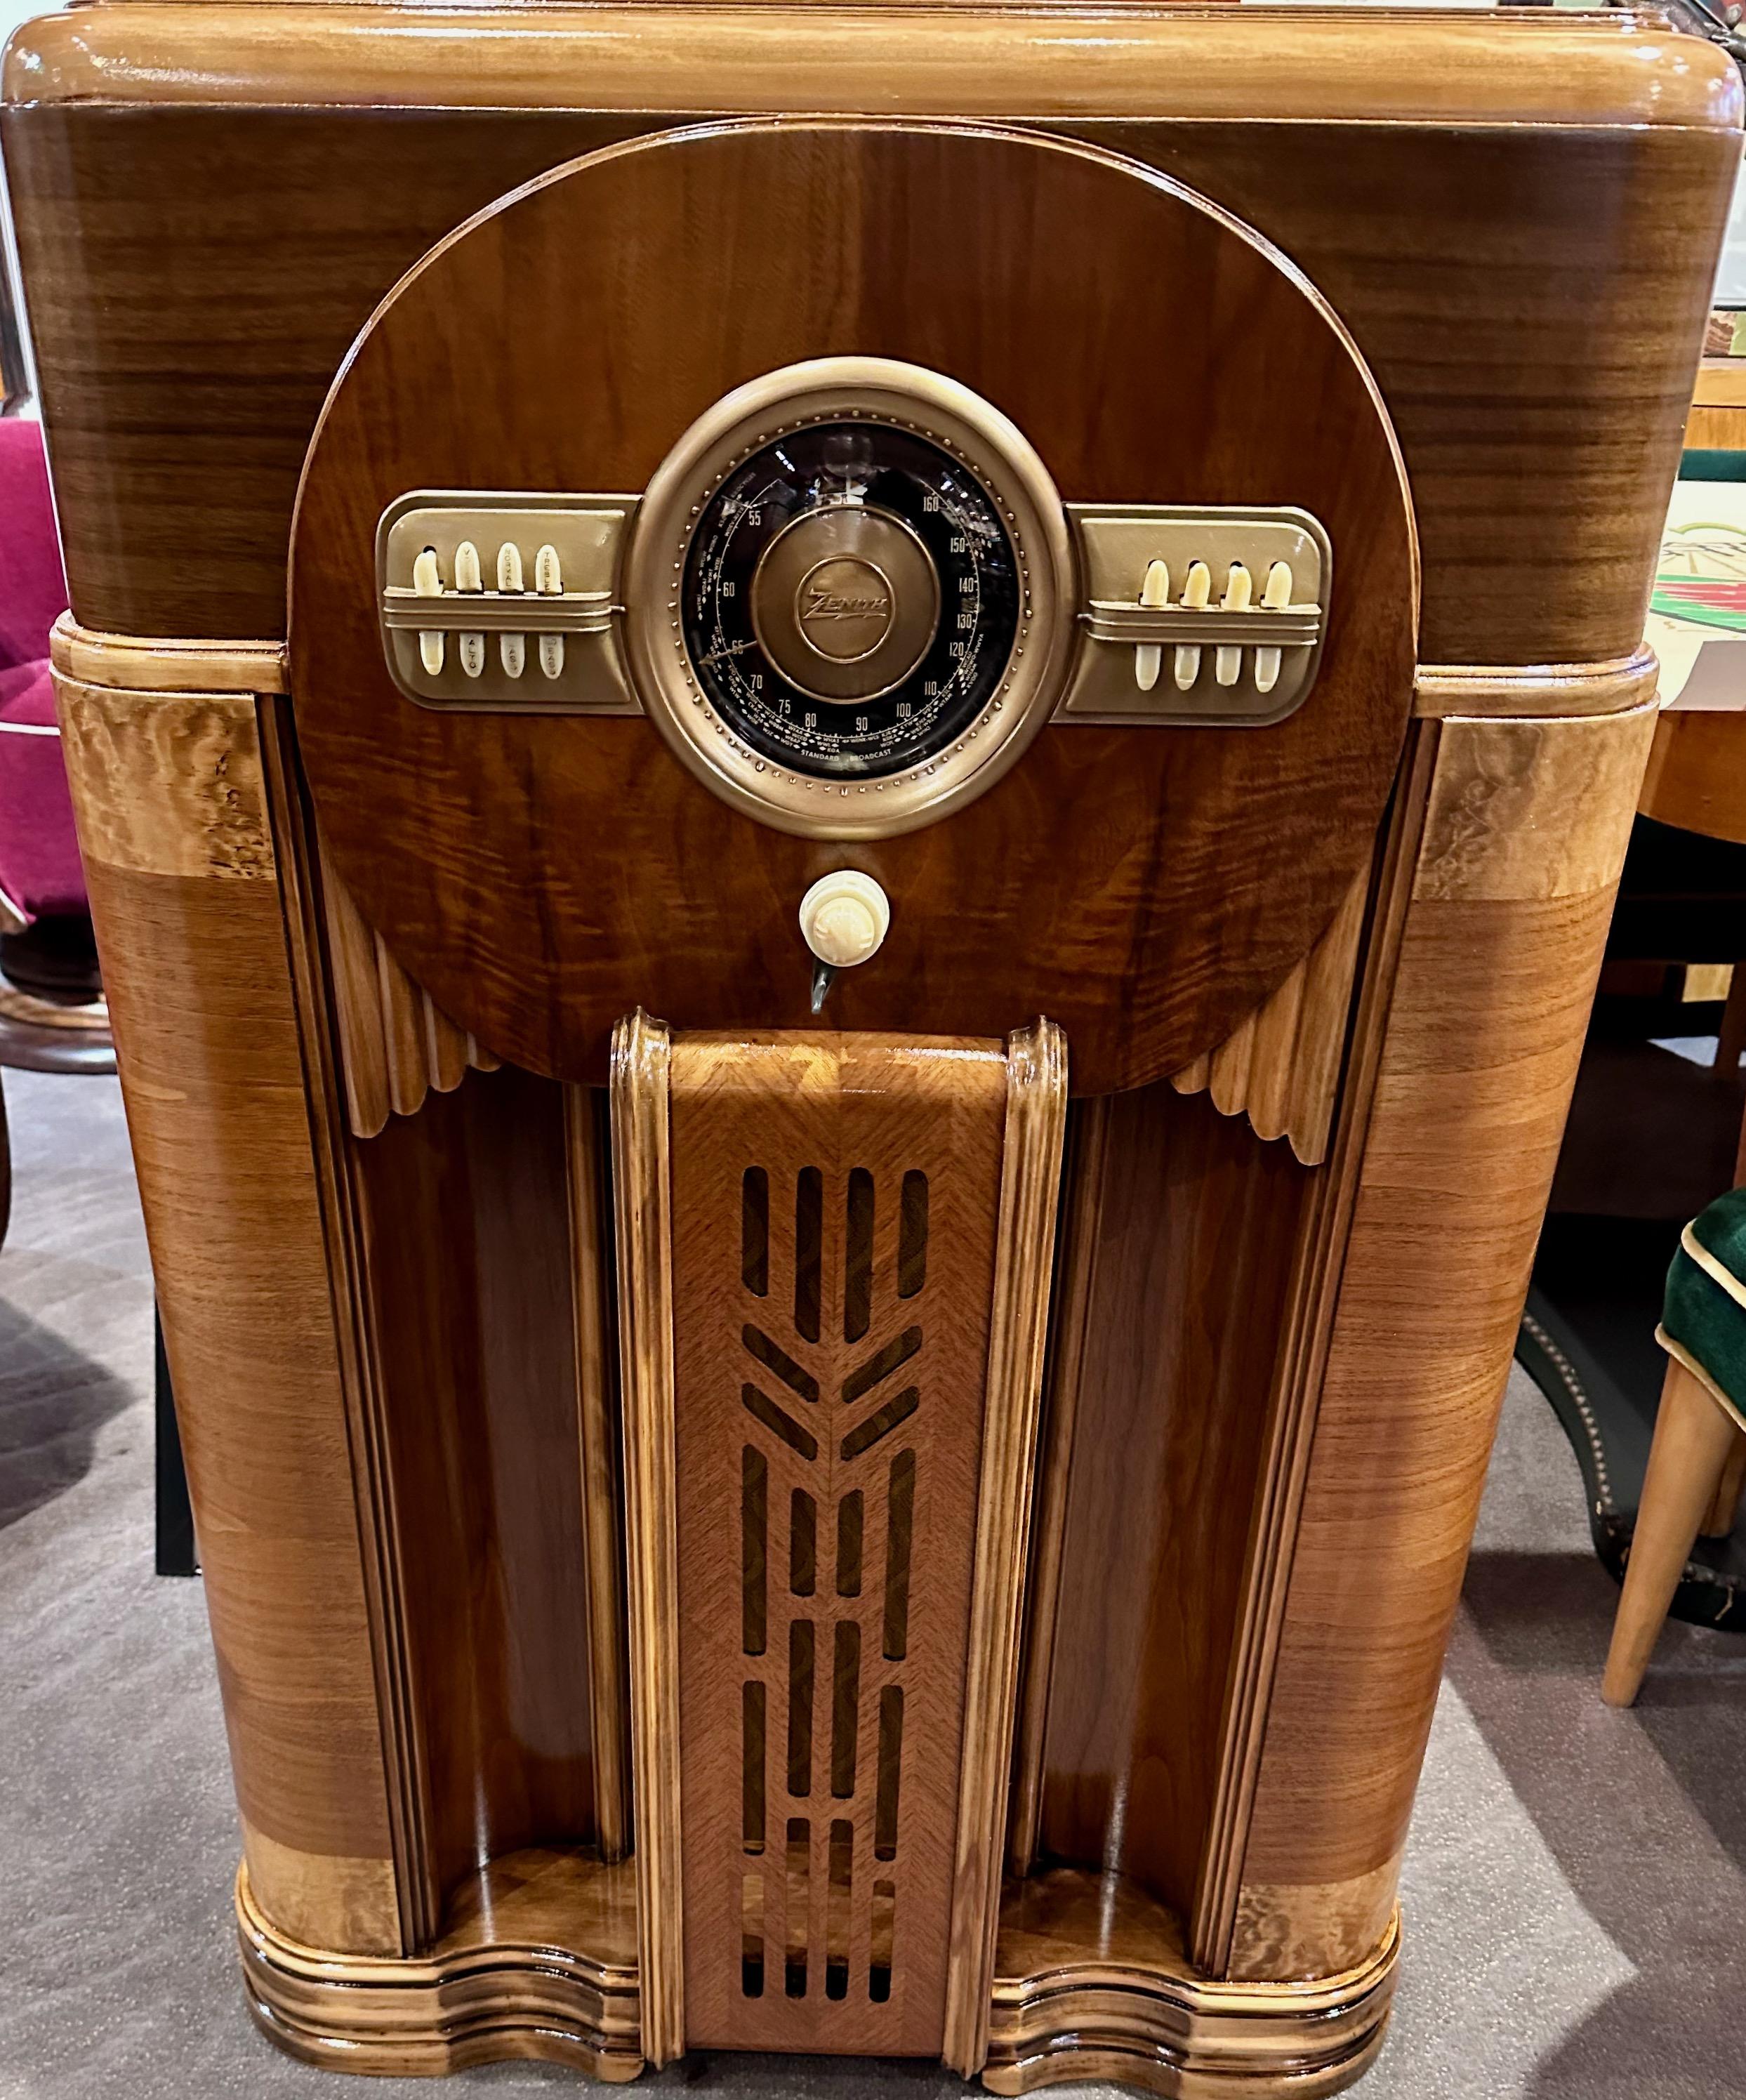 One of Zenith’s best-looking classic consoles was made just before World War II in 1940. Last of the Shutterdials, this twelve-tube radio has been completely refurbished and plays very well with strong selectivity. It has the Wavemagnet internal